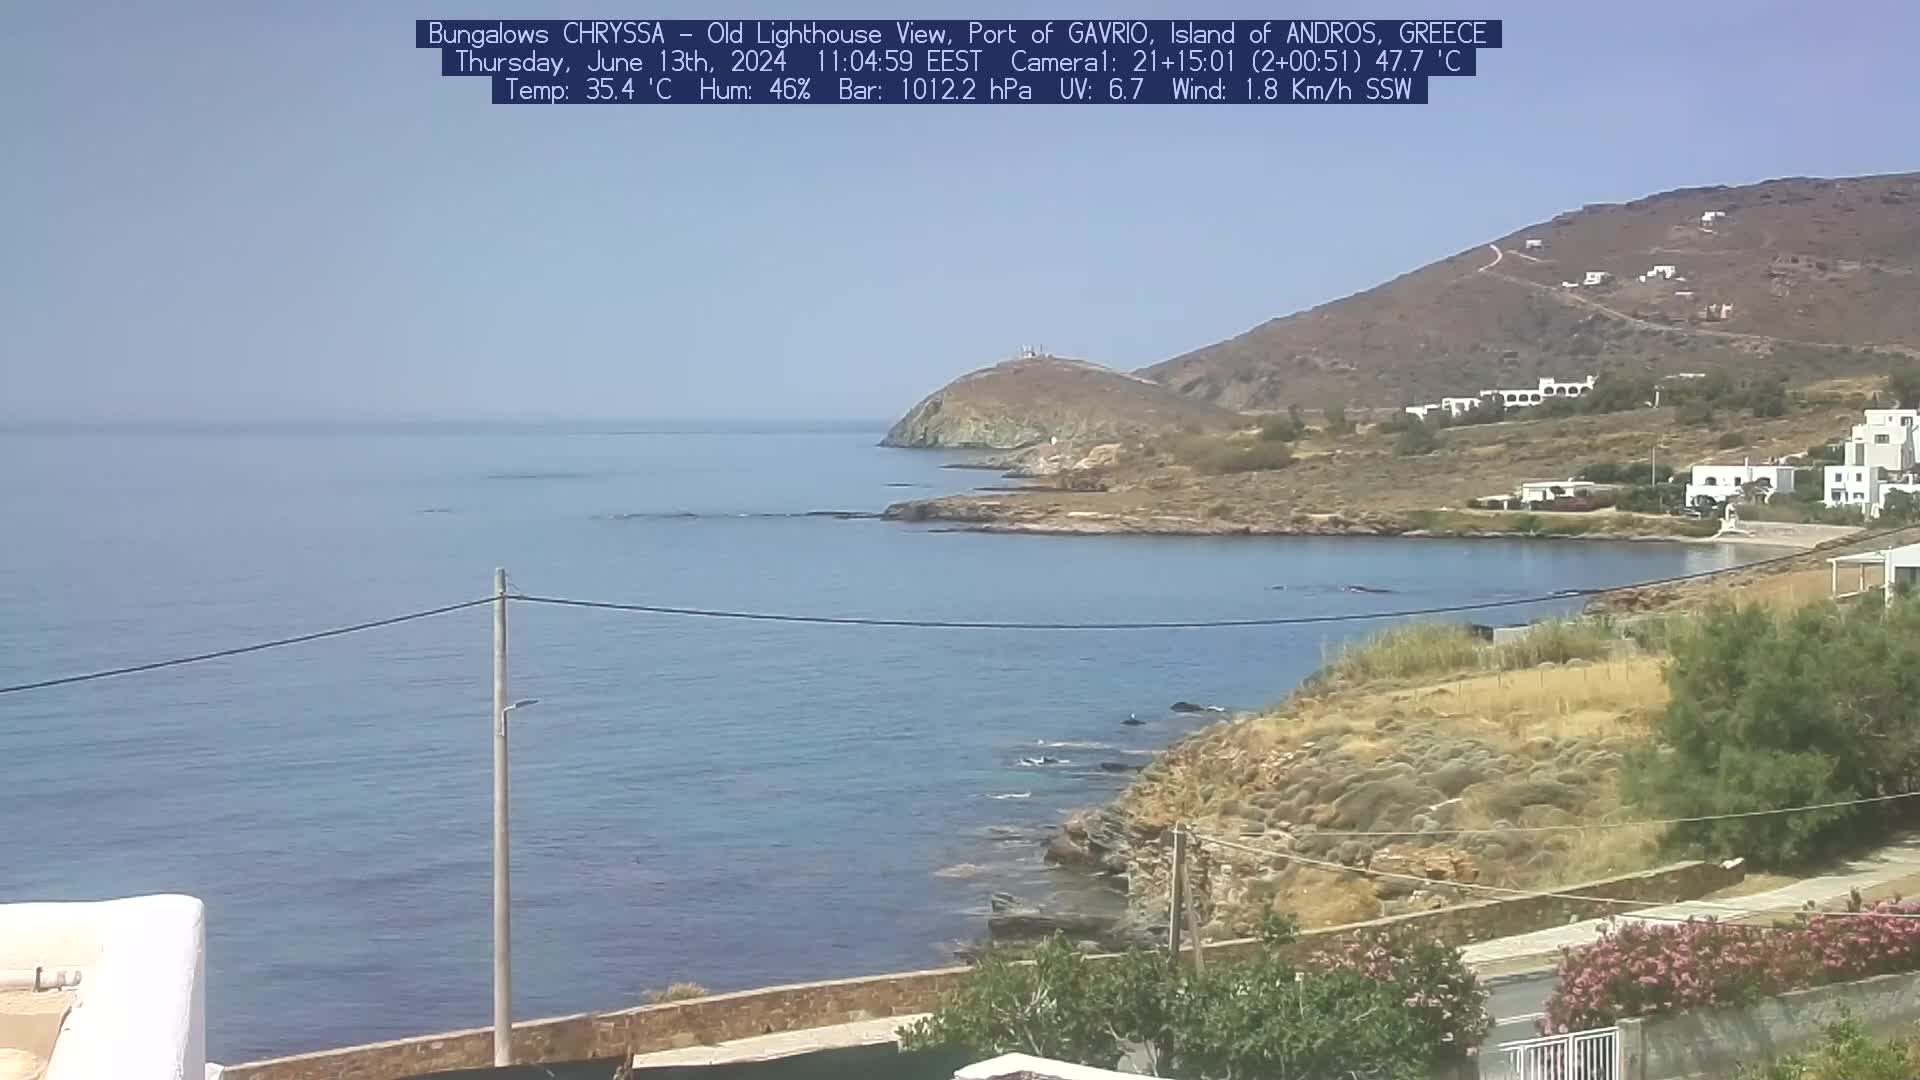 Andros - Gavrion Mar. 11:05